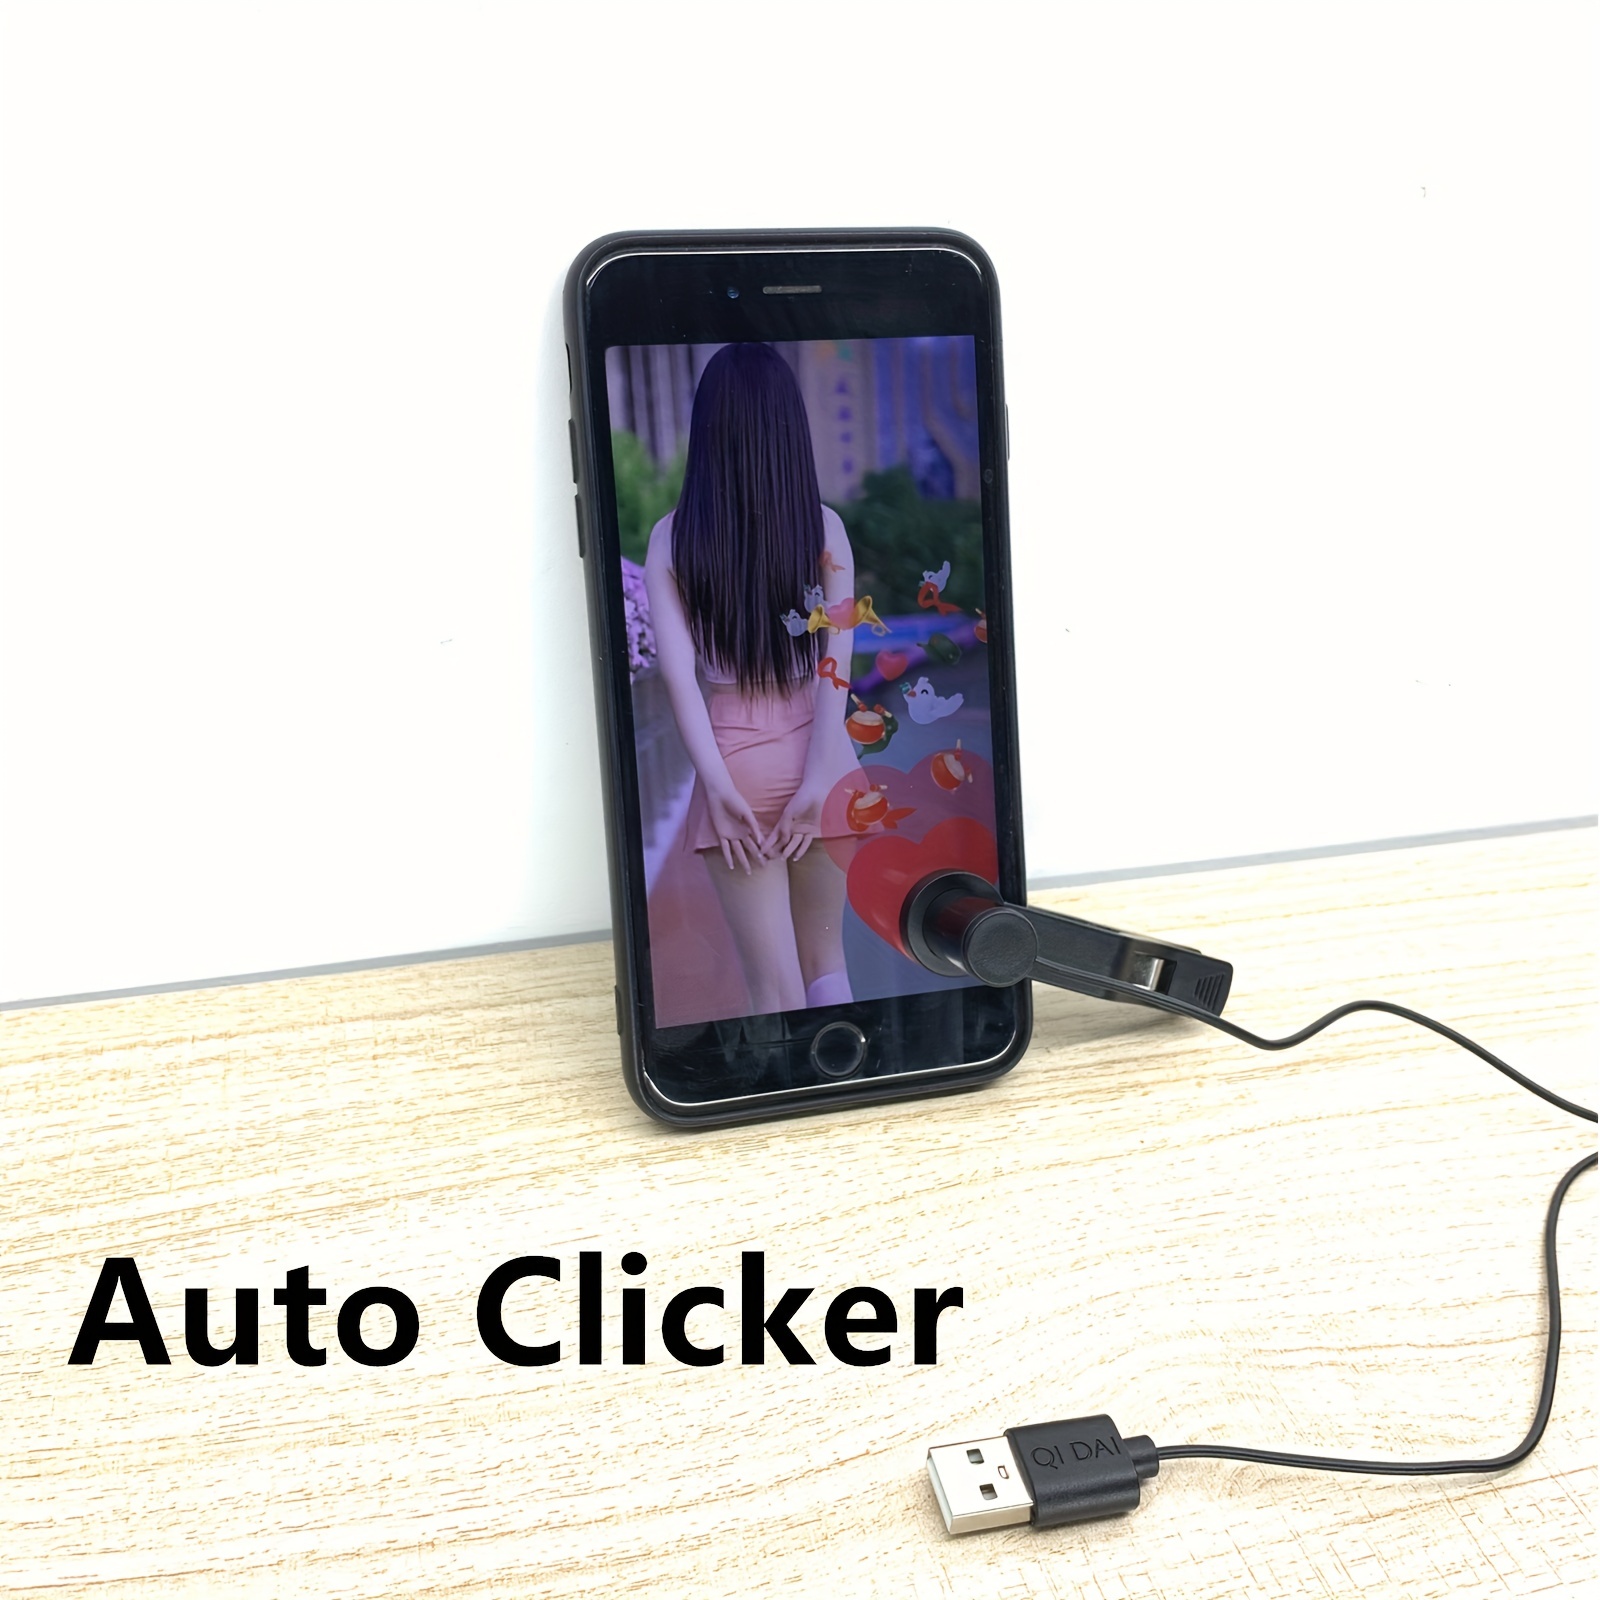 Auto Clickers For iPhone, iOS Auto Clickers